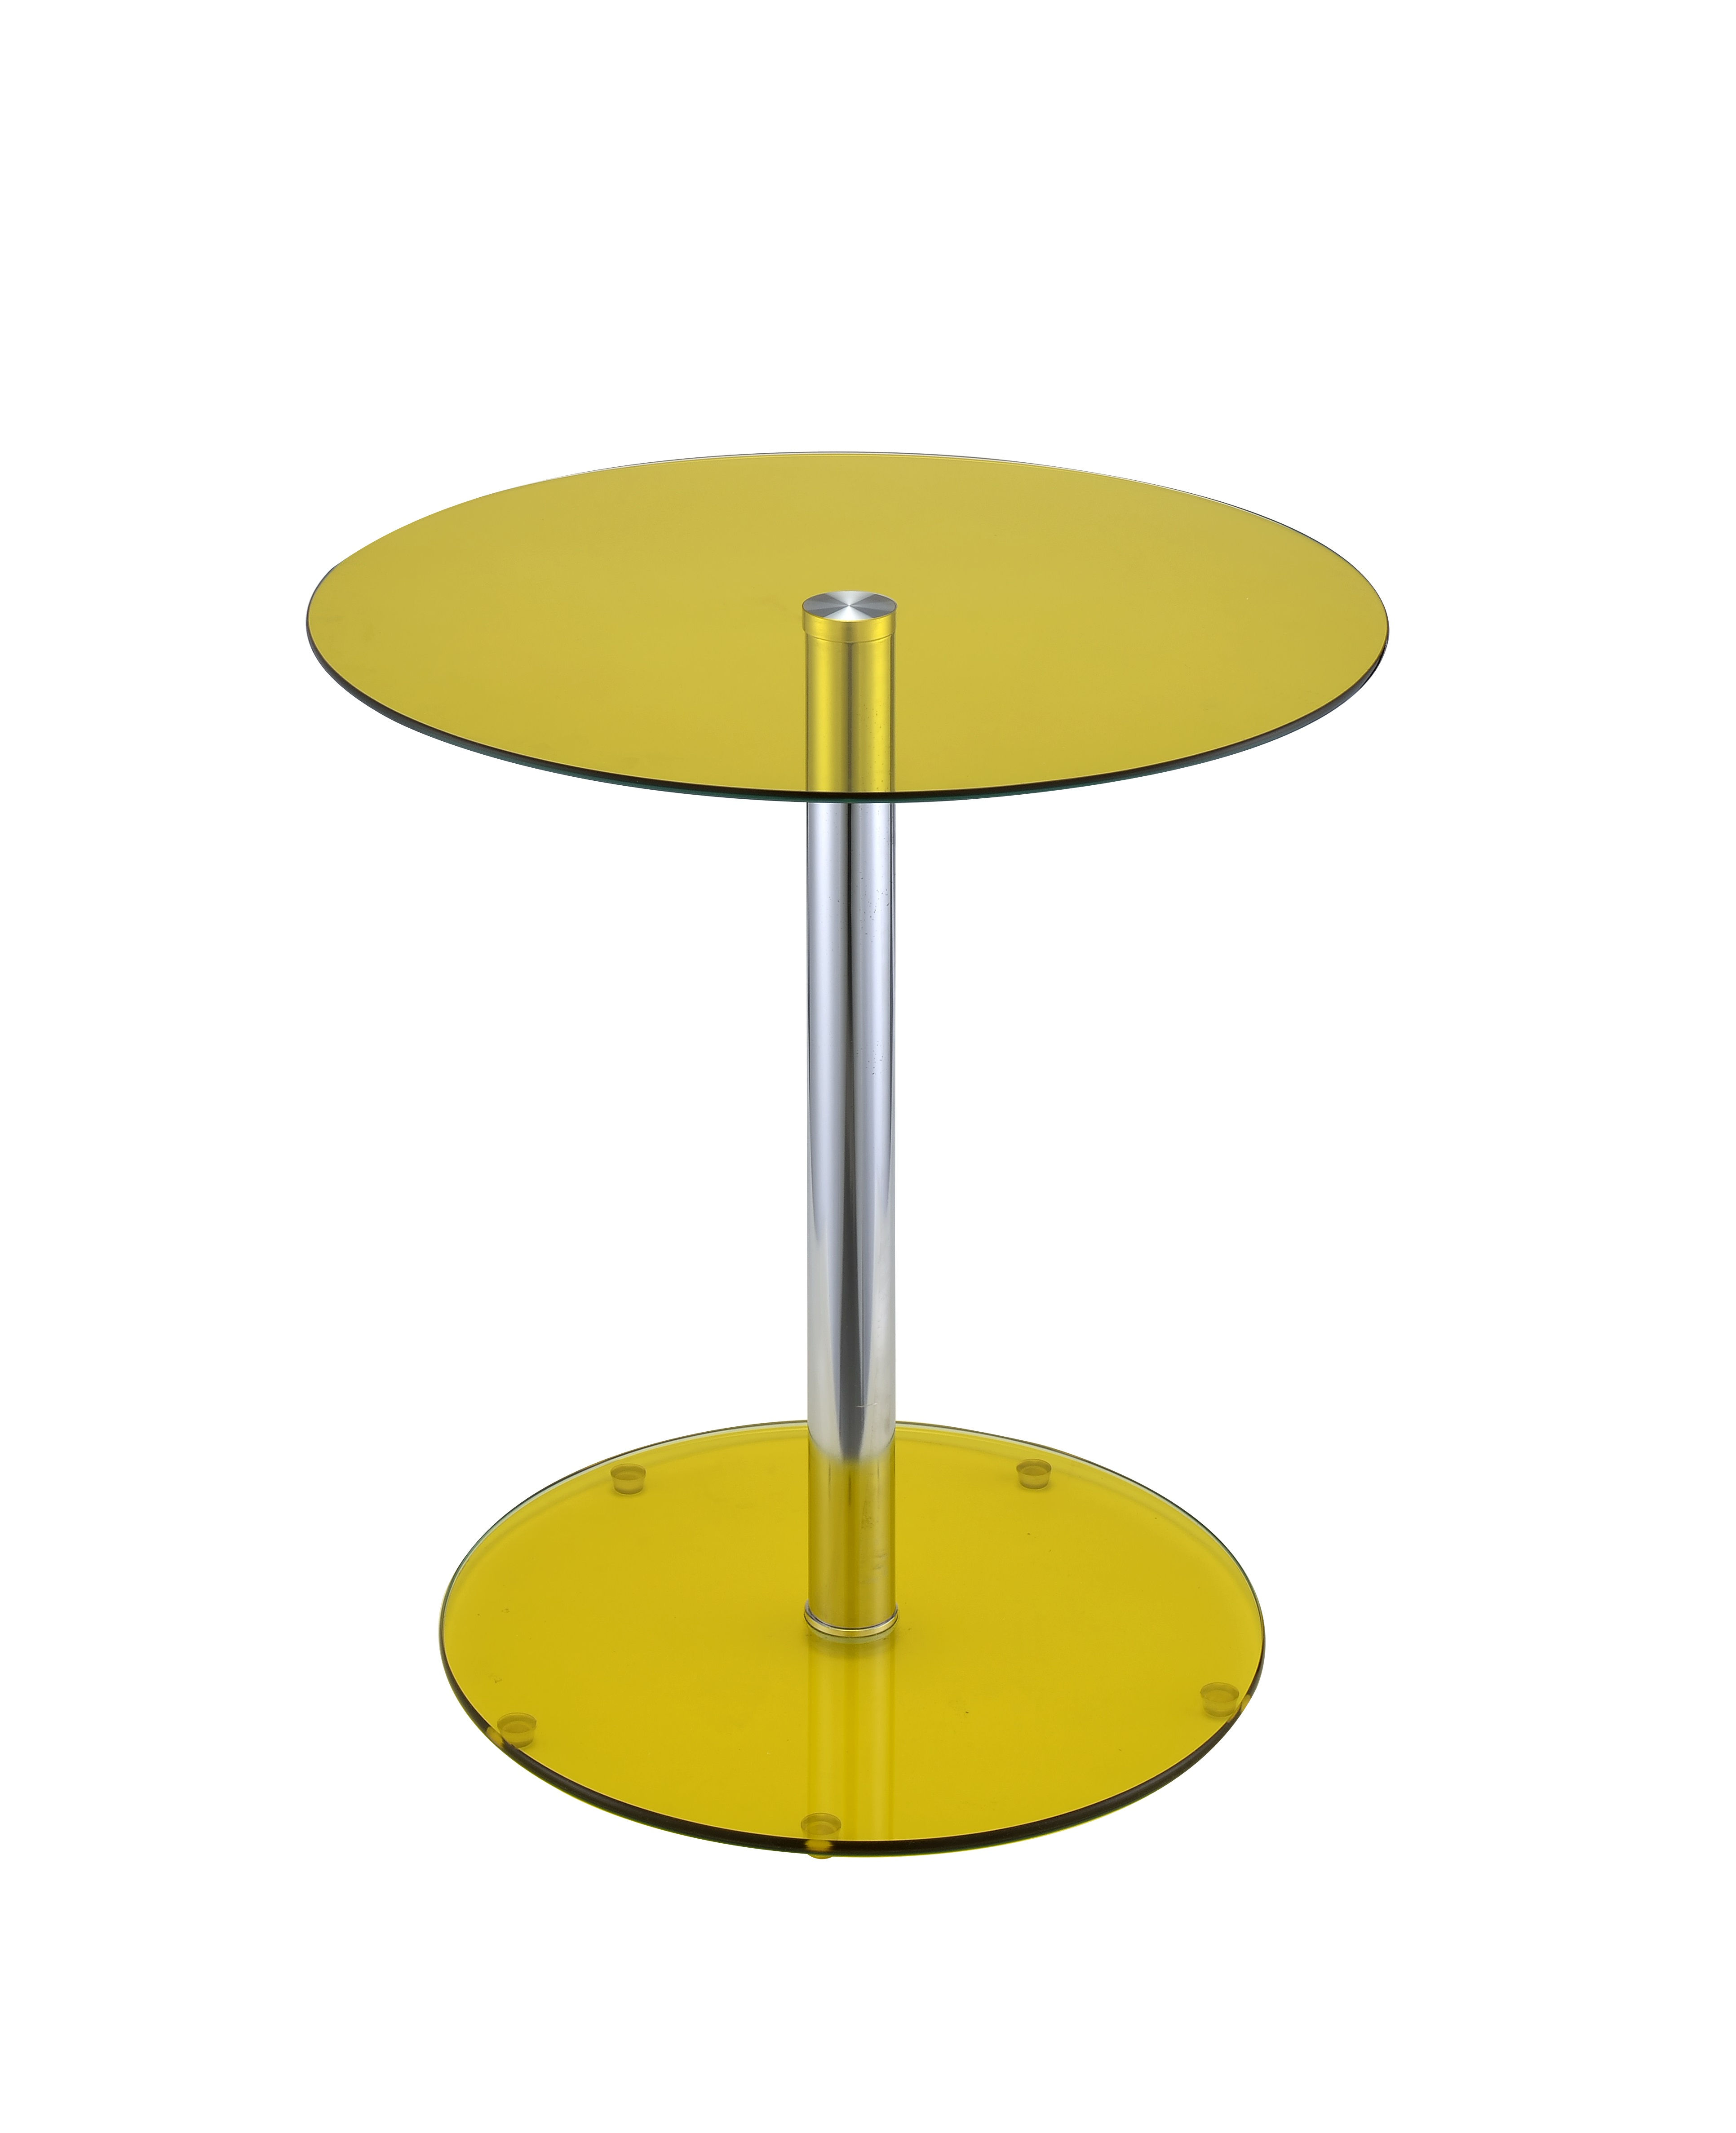 astounding yellow outdoor accent table garden white ideas home metal clearance small side target umbrella chairs big tables and lots cover brick furniture full size antique round